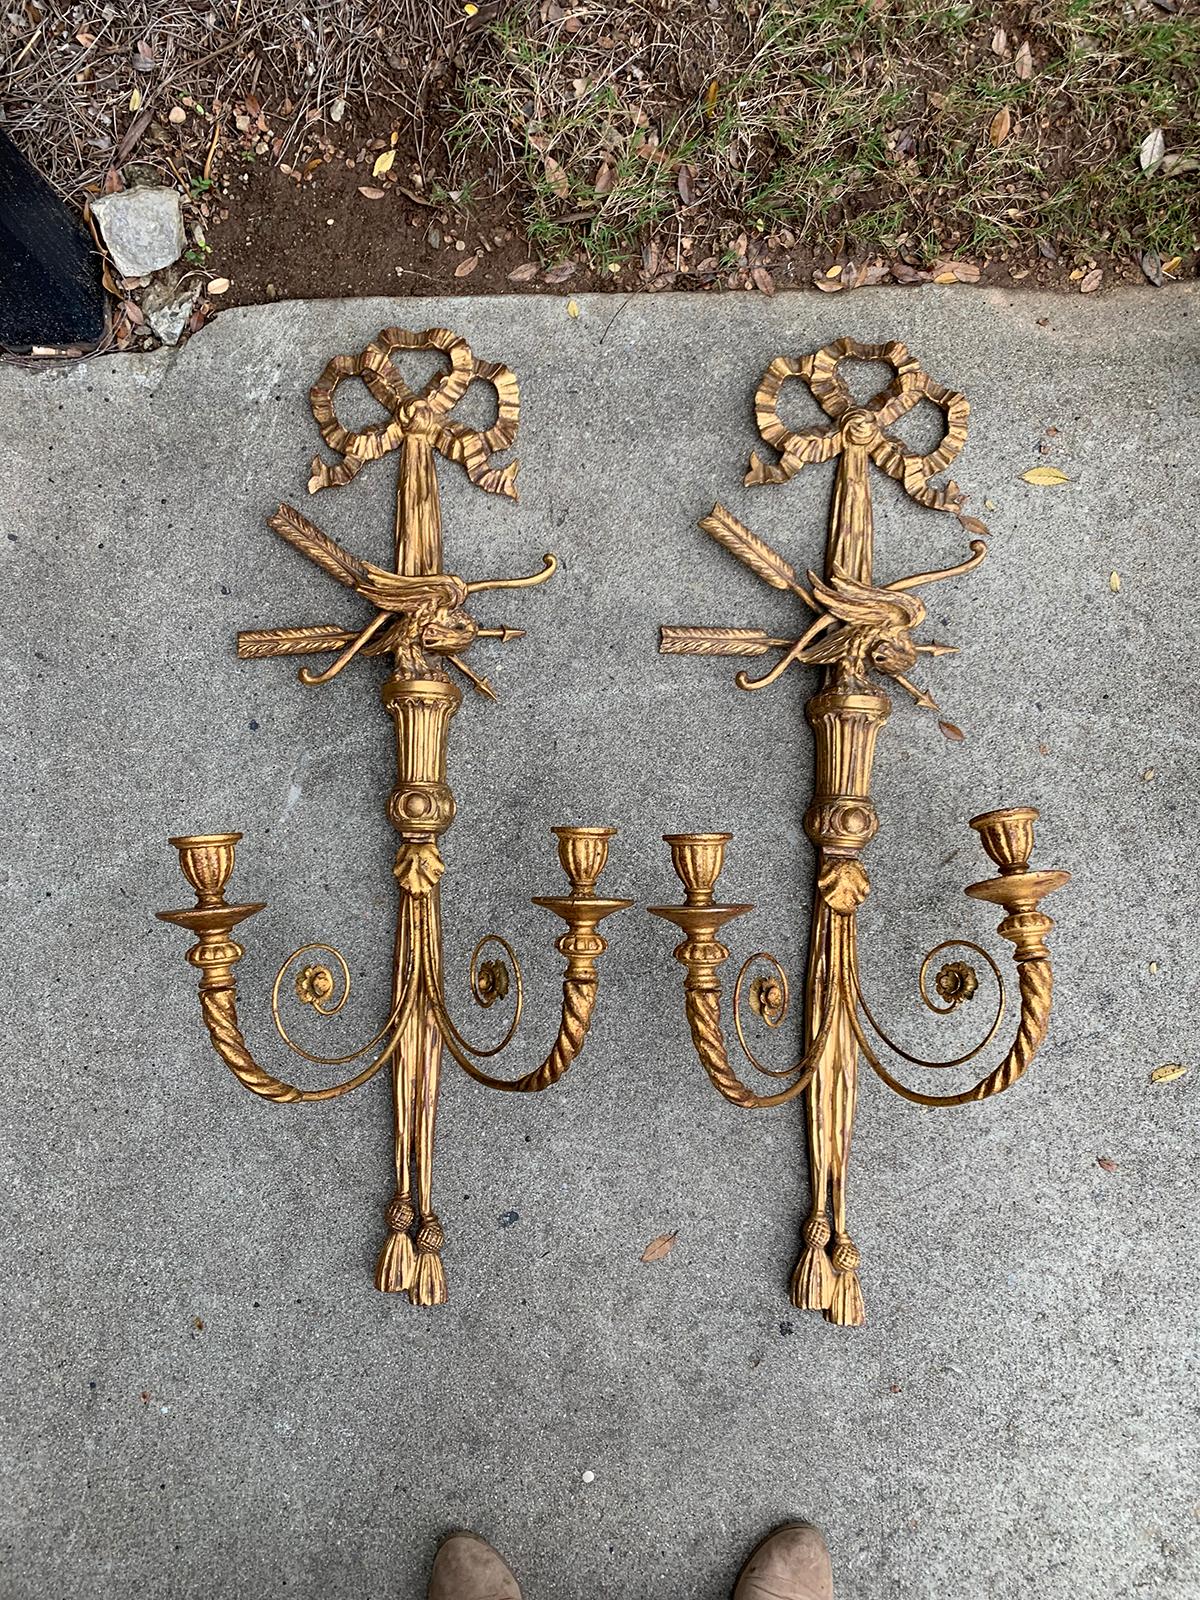 Pair of 19th century large Georgian style giltwood eagle sconces.